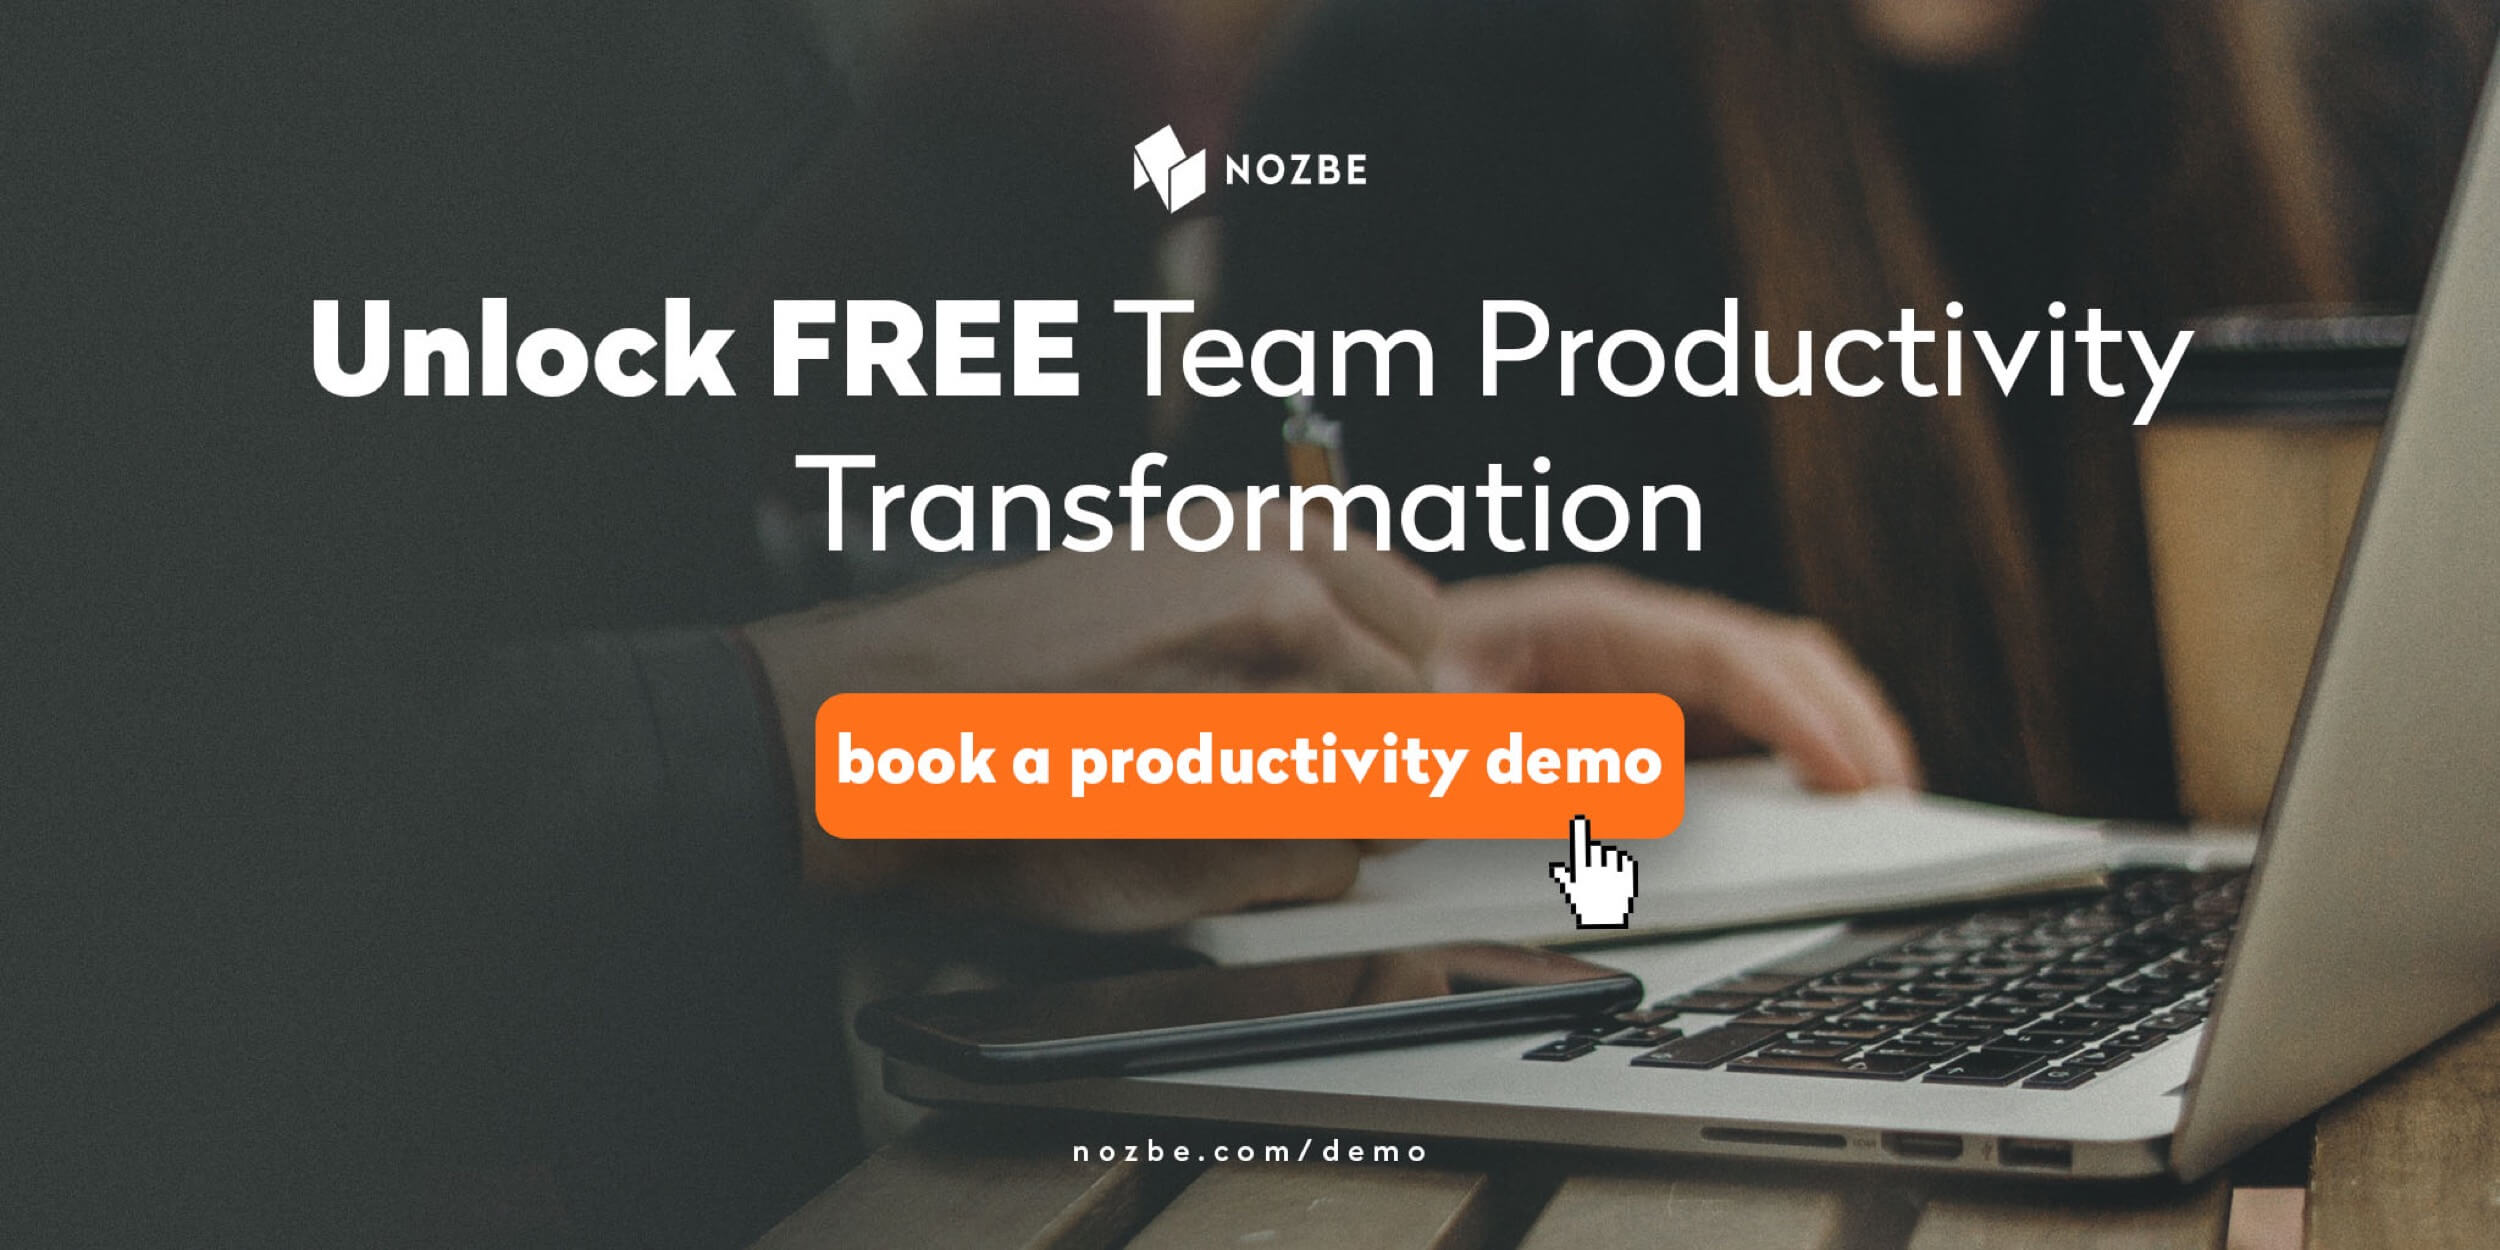 Why at Nozbe we’re giving away free productivity consultation?